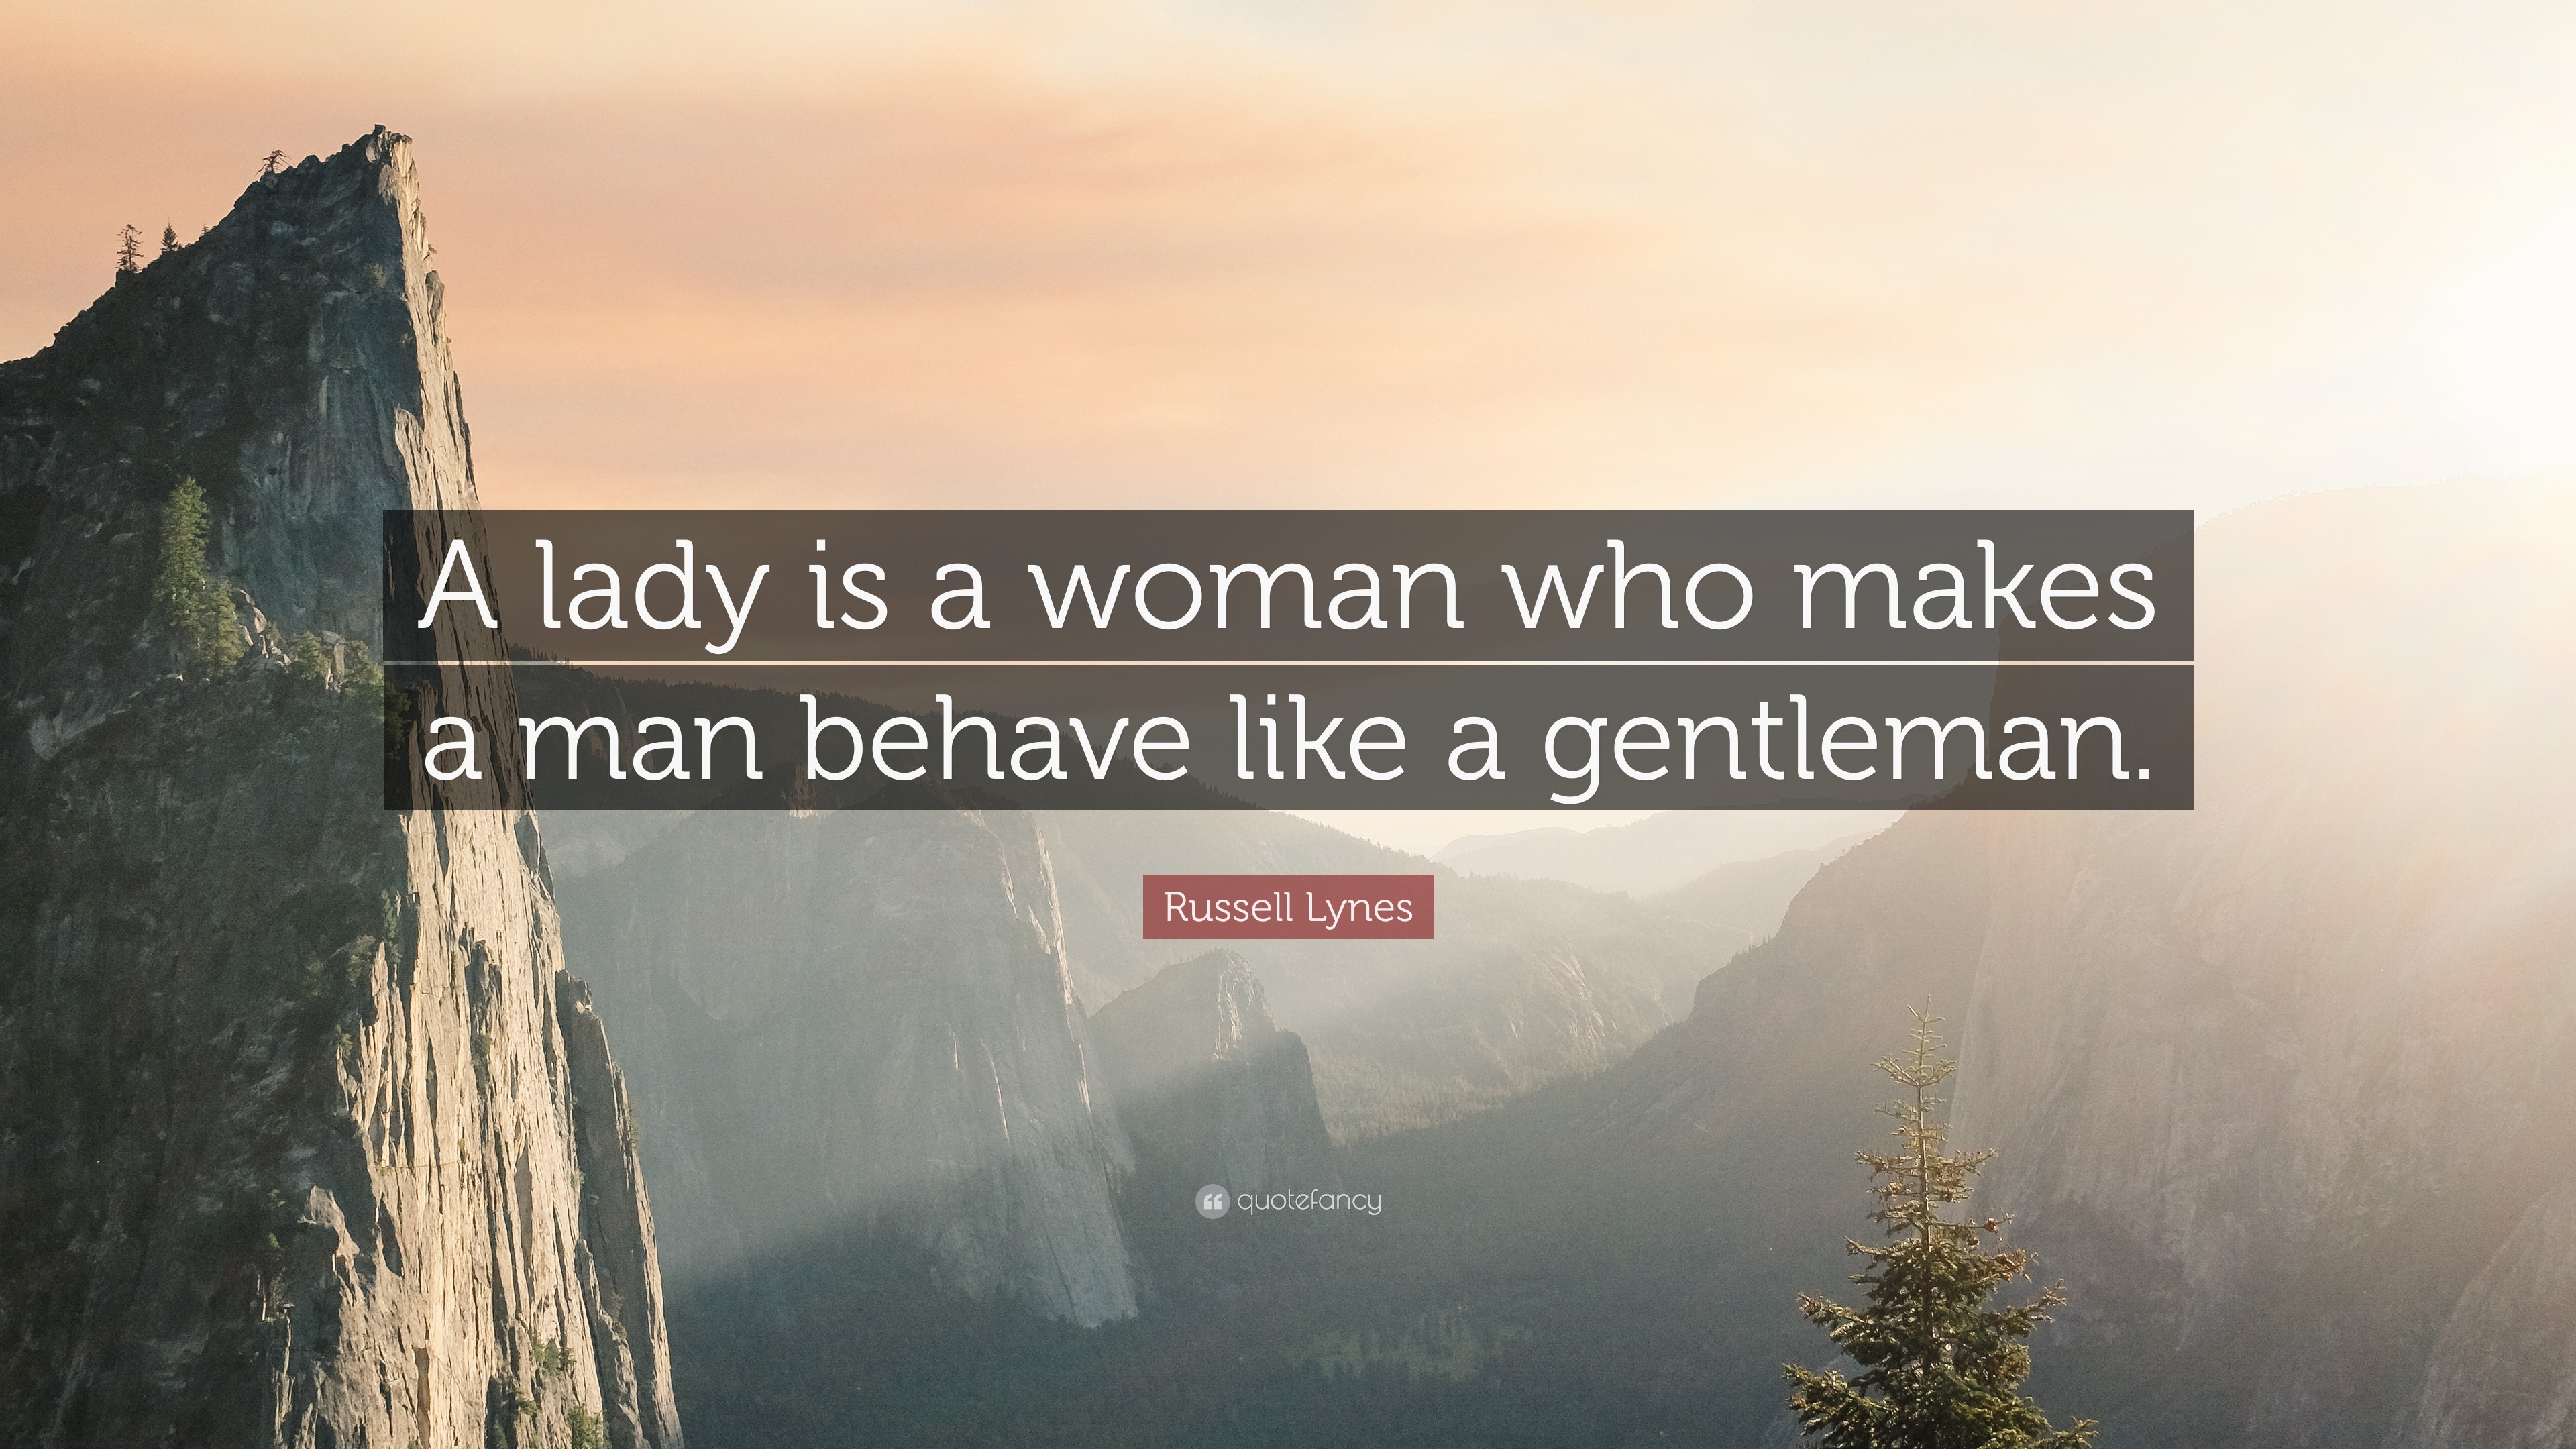 Russell Lynes Quote: “A lady is a woman who makes a man behave like a ...